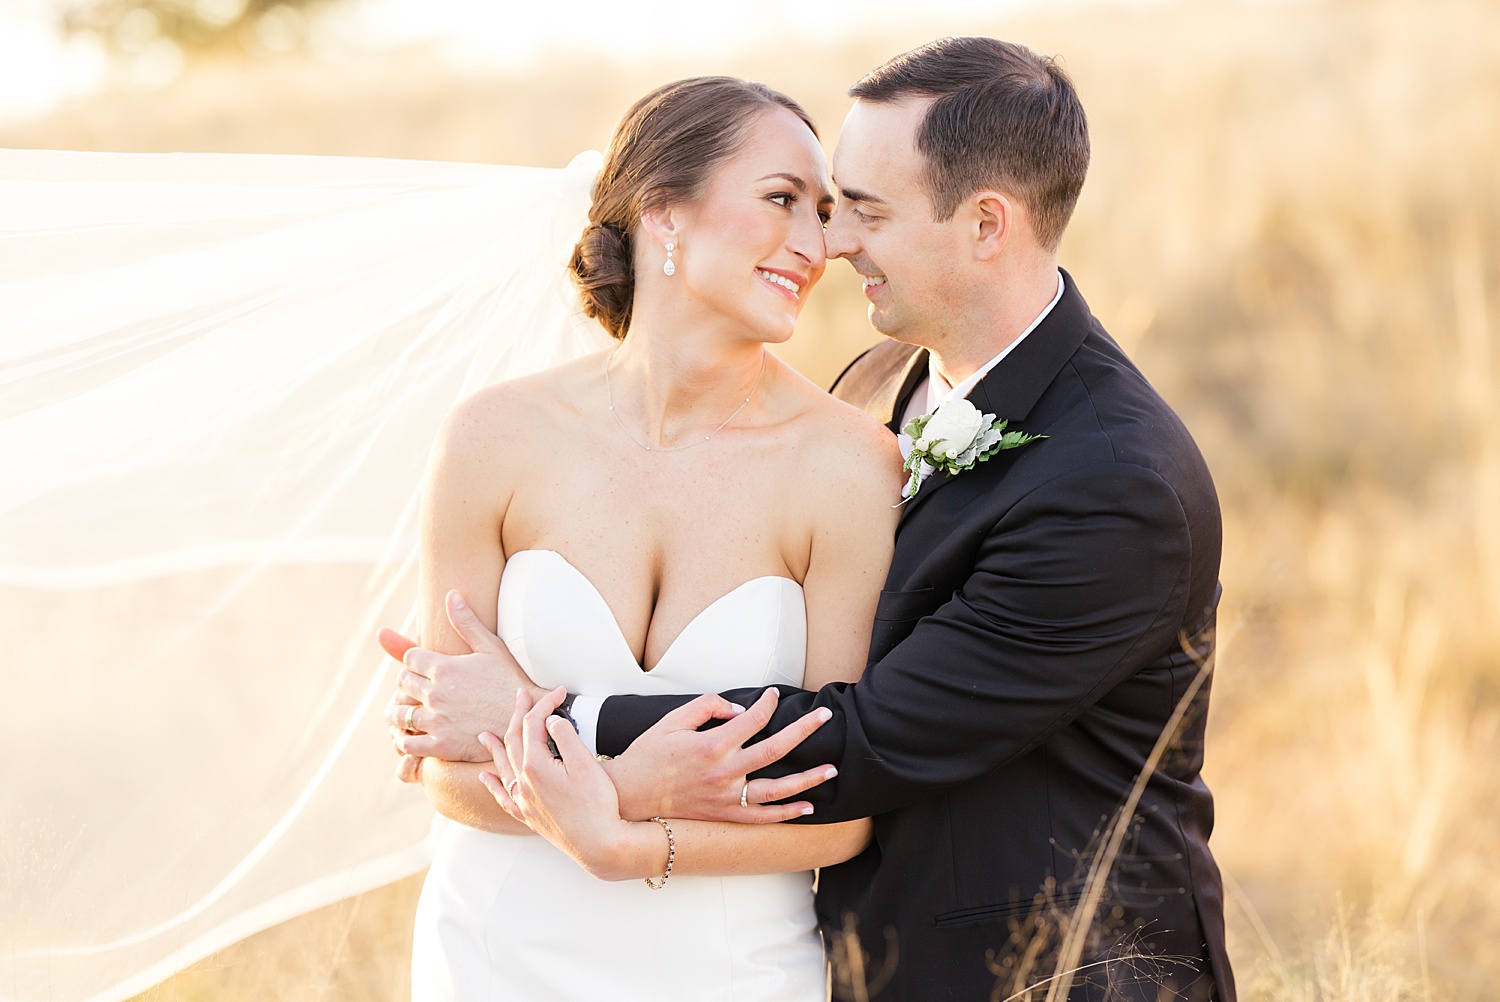 newlyweds embrace in tall grace during wedding portraits